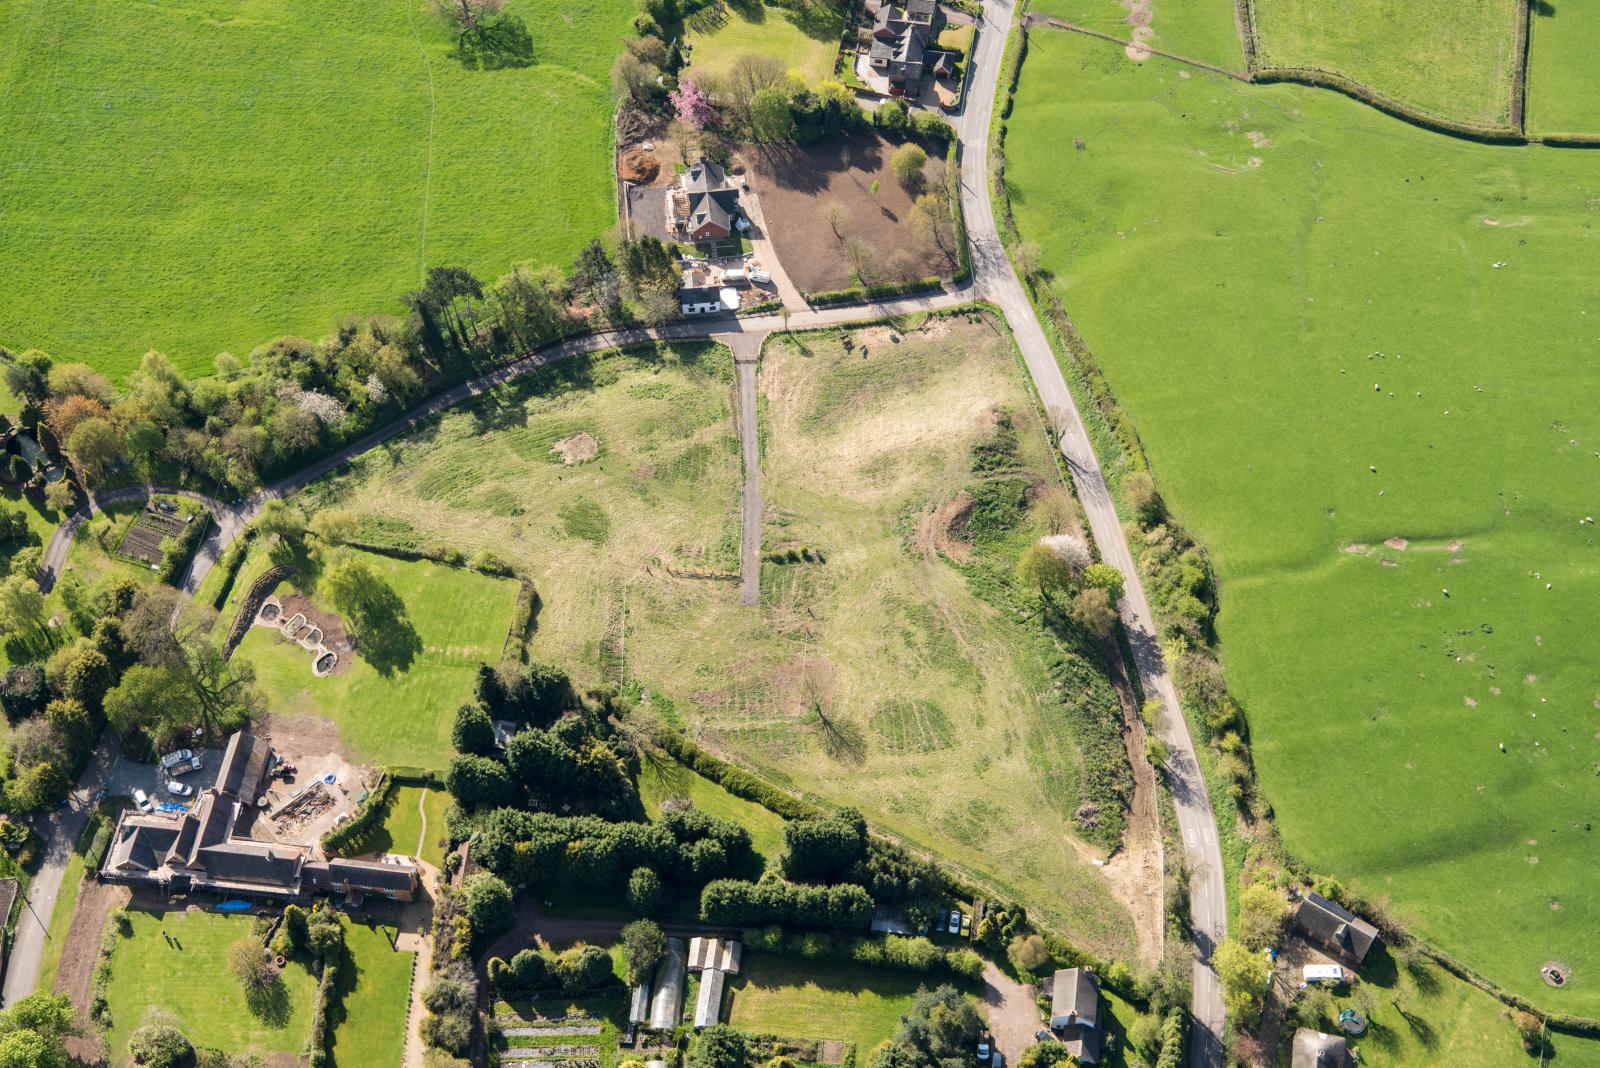 Aerial view of damage to Withybrook scheduled monument